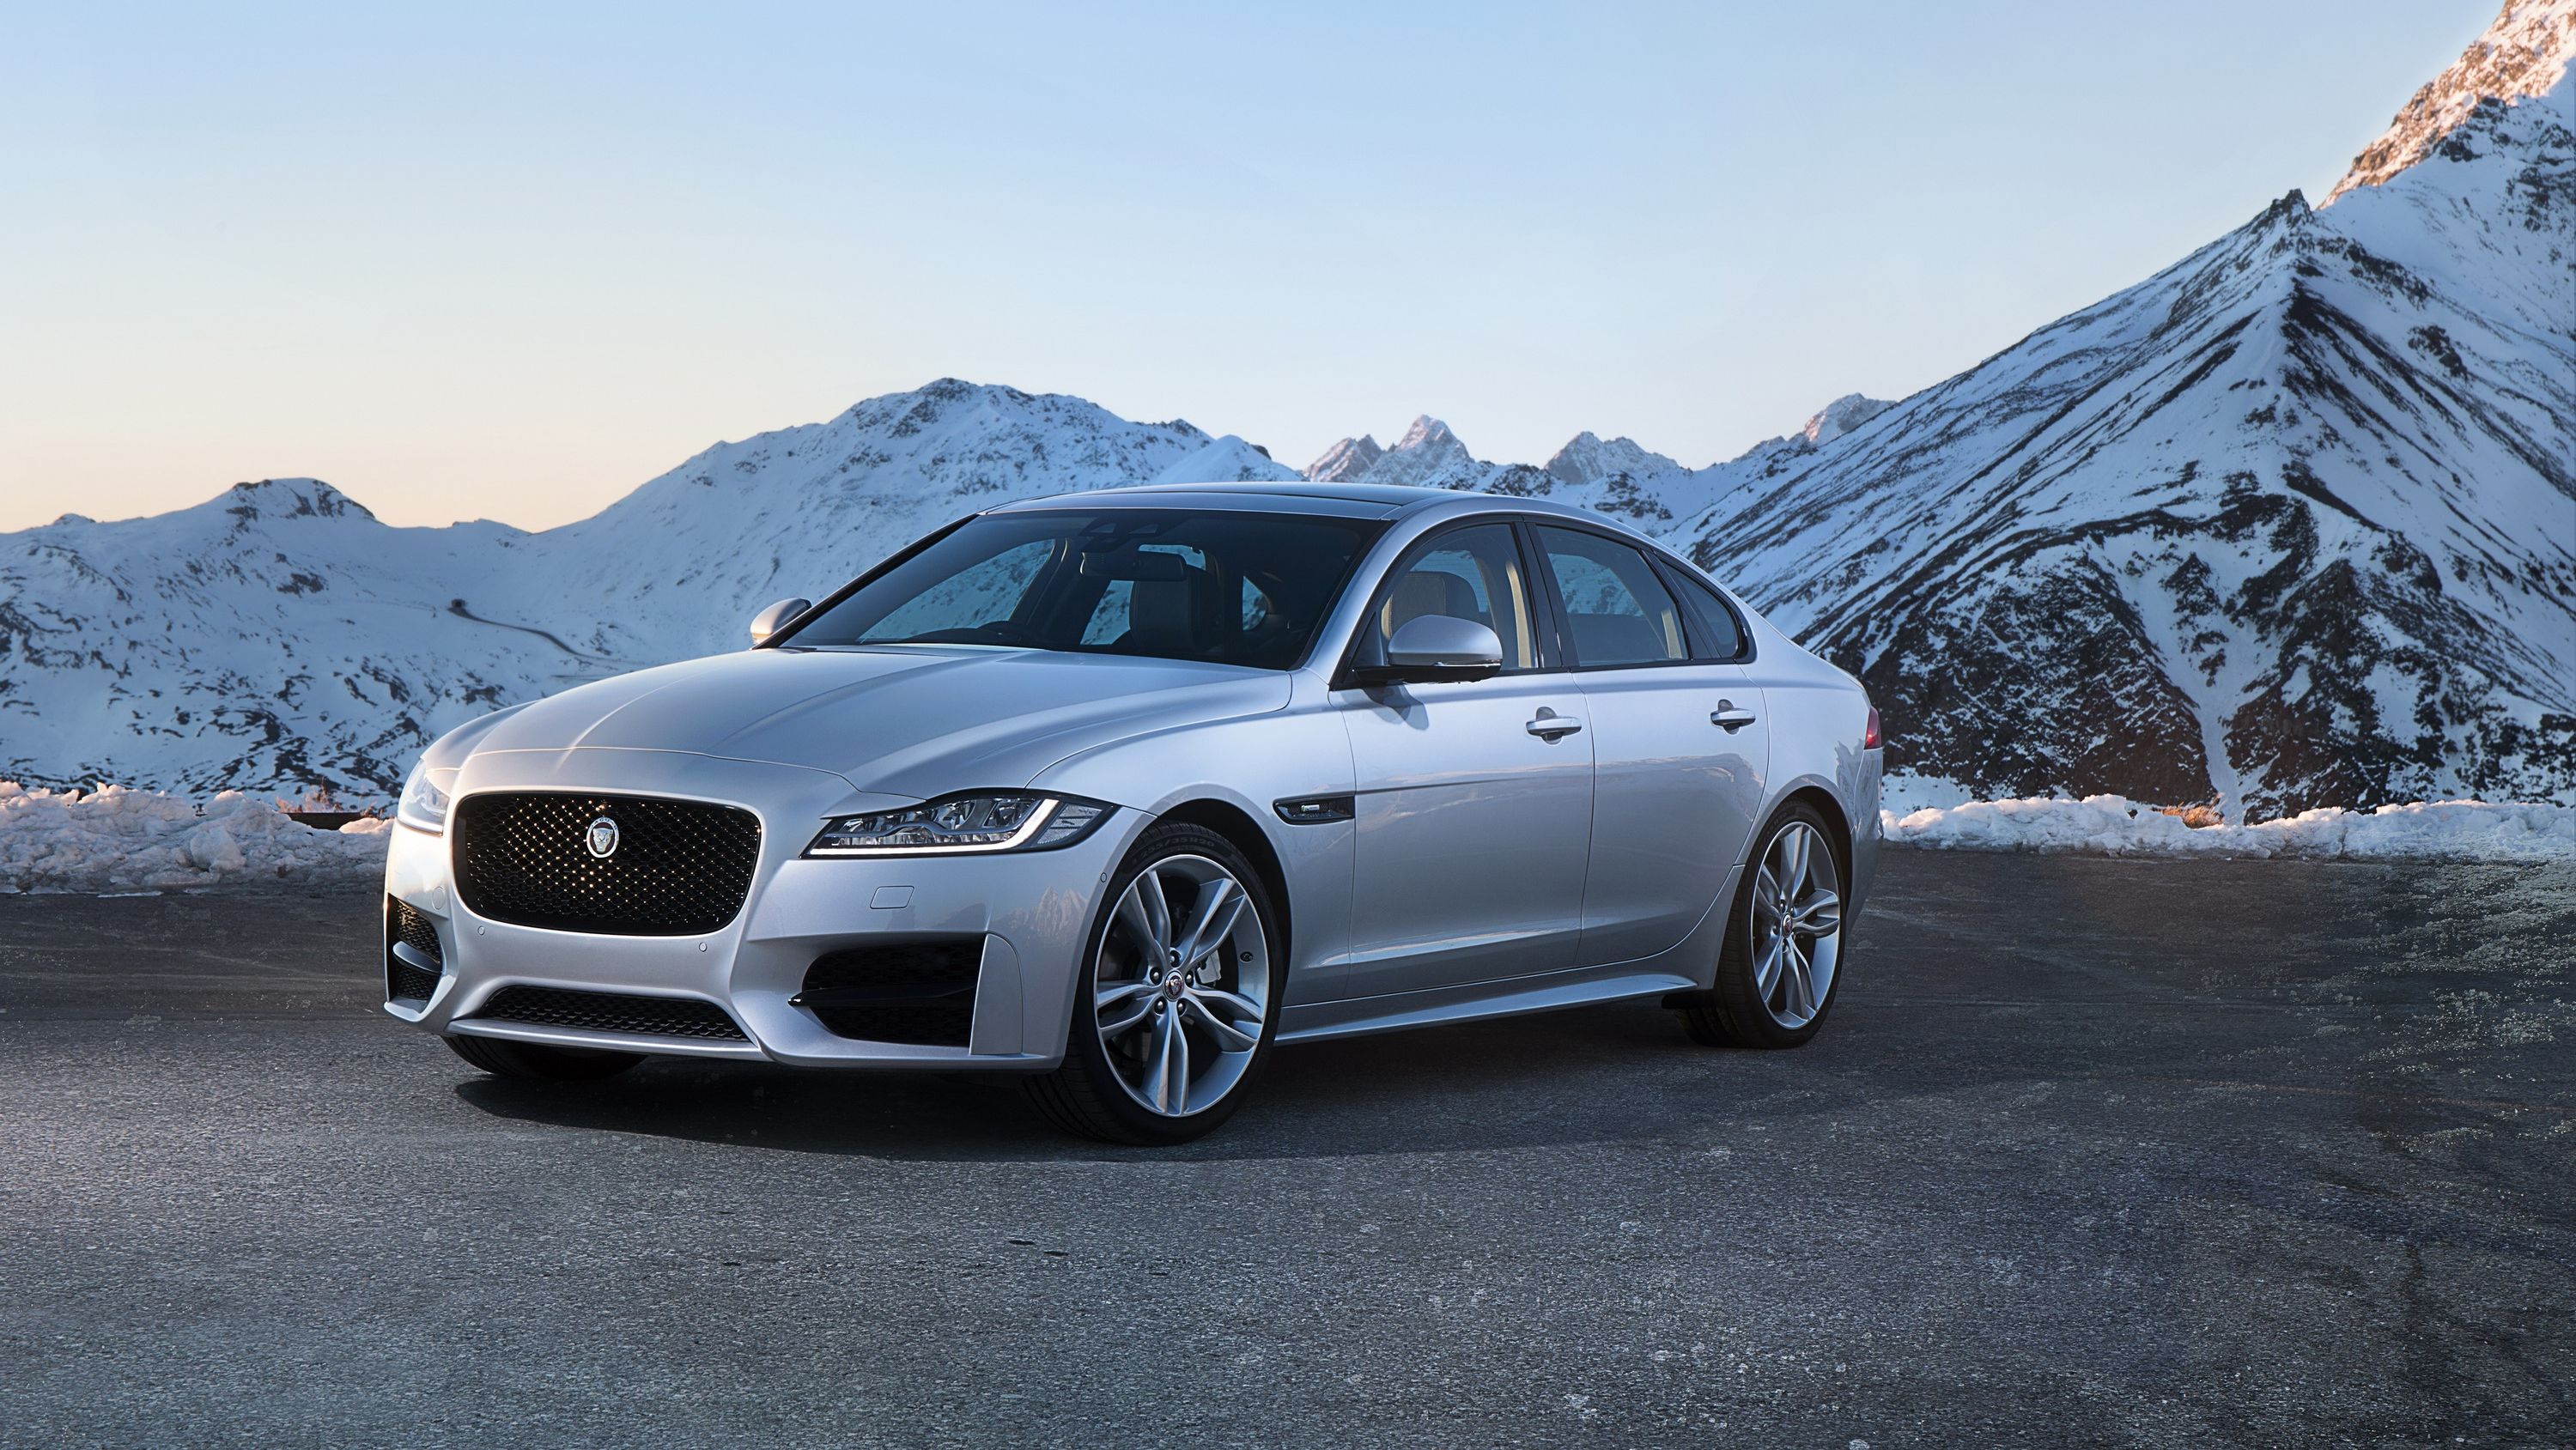 2016 The Jaguar XF 20d Offers Better Economy and a Lower Price with Decent Performance